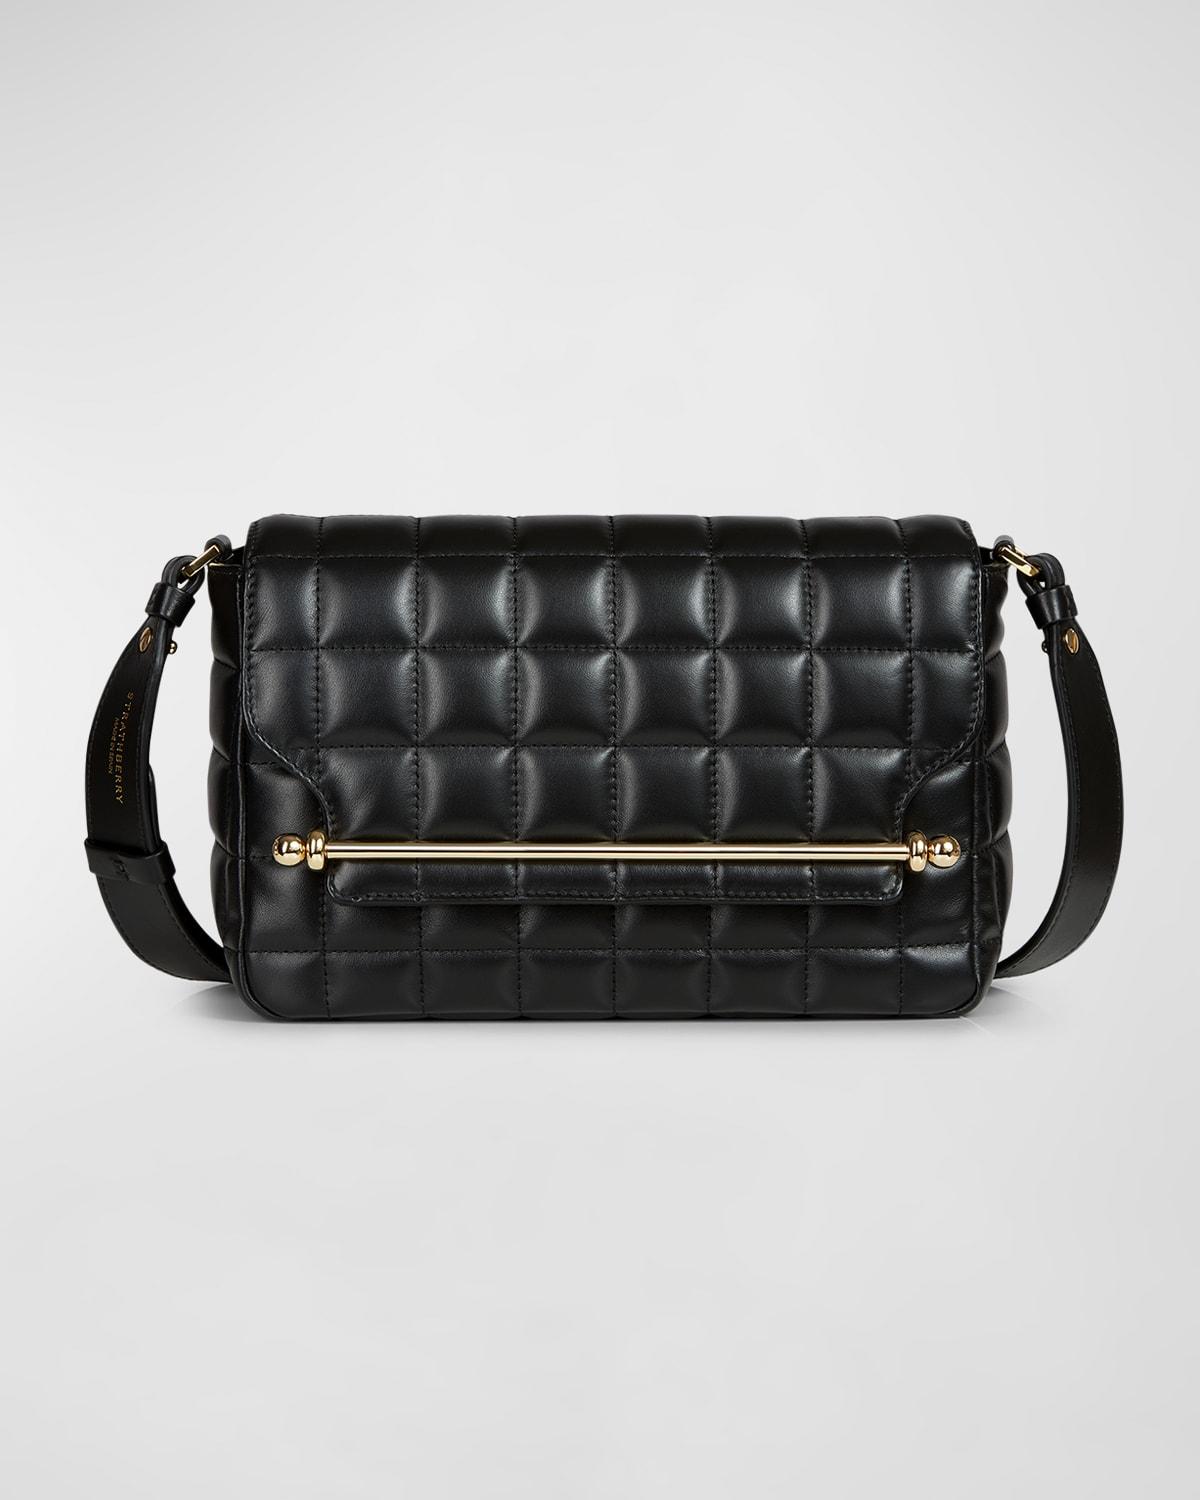 Women's East/west Mini Bag by Strathberry